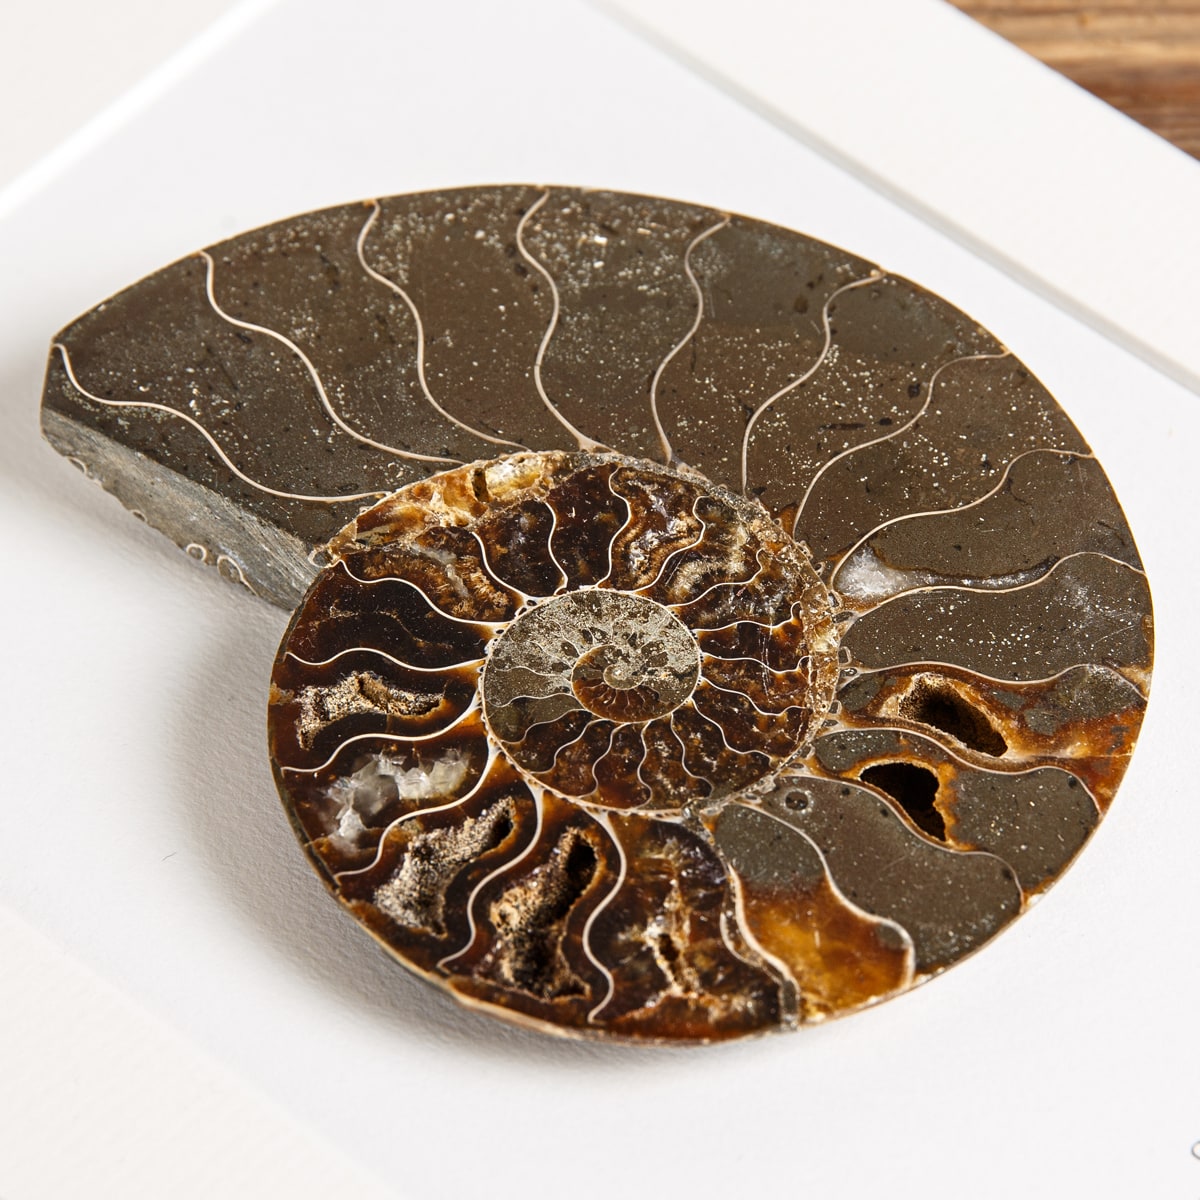 Ammonite Cut and Polished Fossil in Box Frame (Cleoniceras sp)